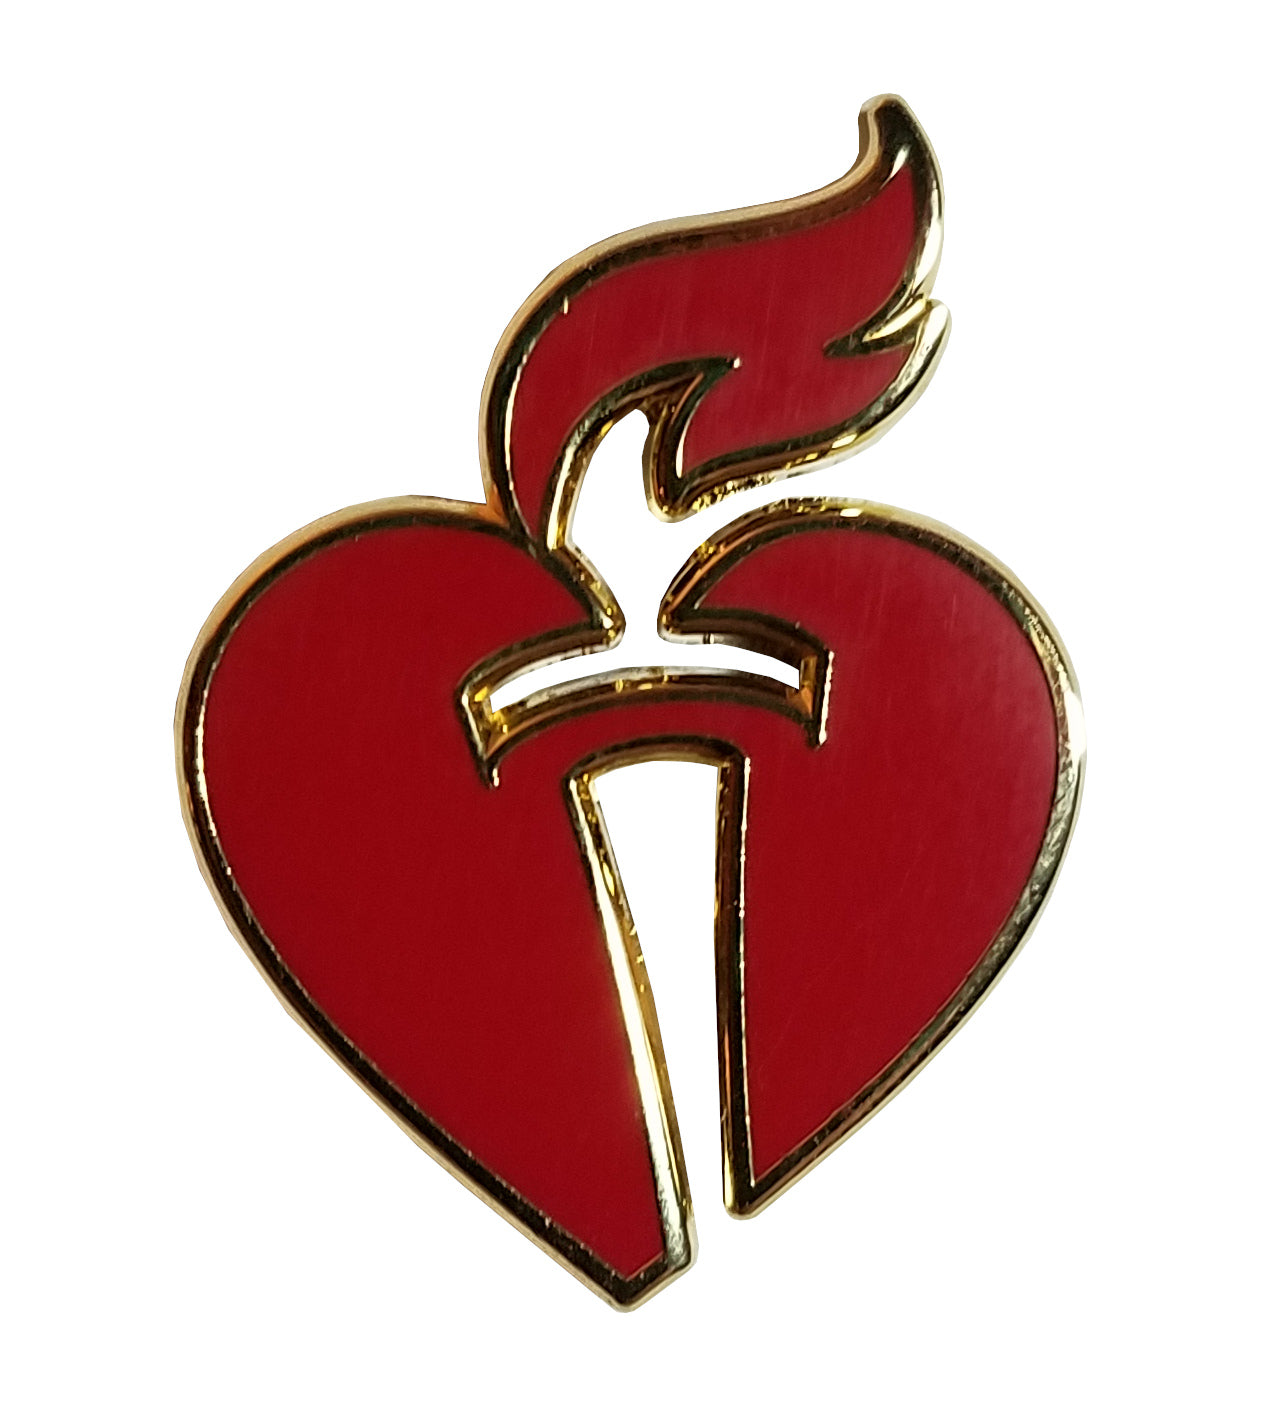 American Heart Association Heart/Torch Lapel Pin, Magnetic - Pack of 5